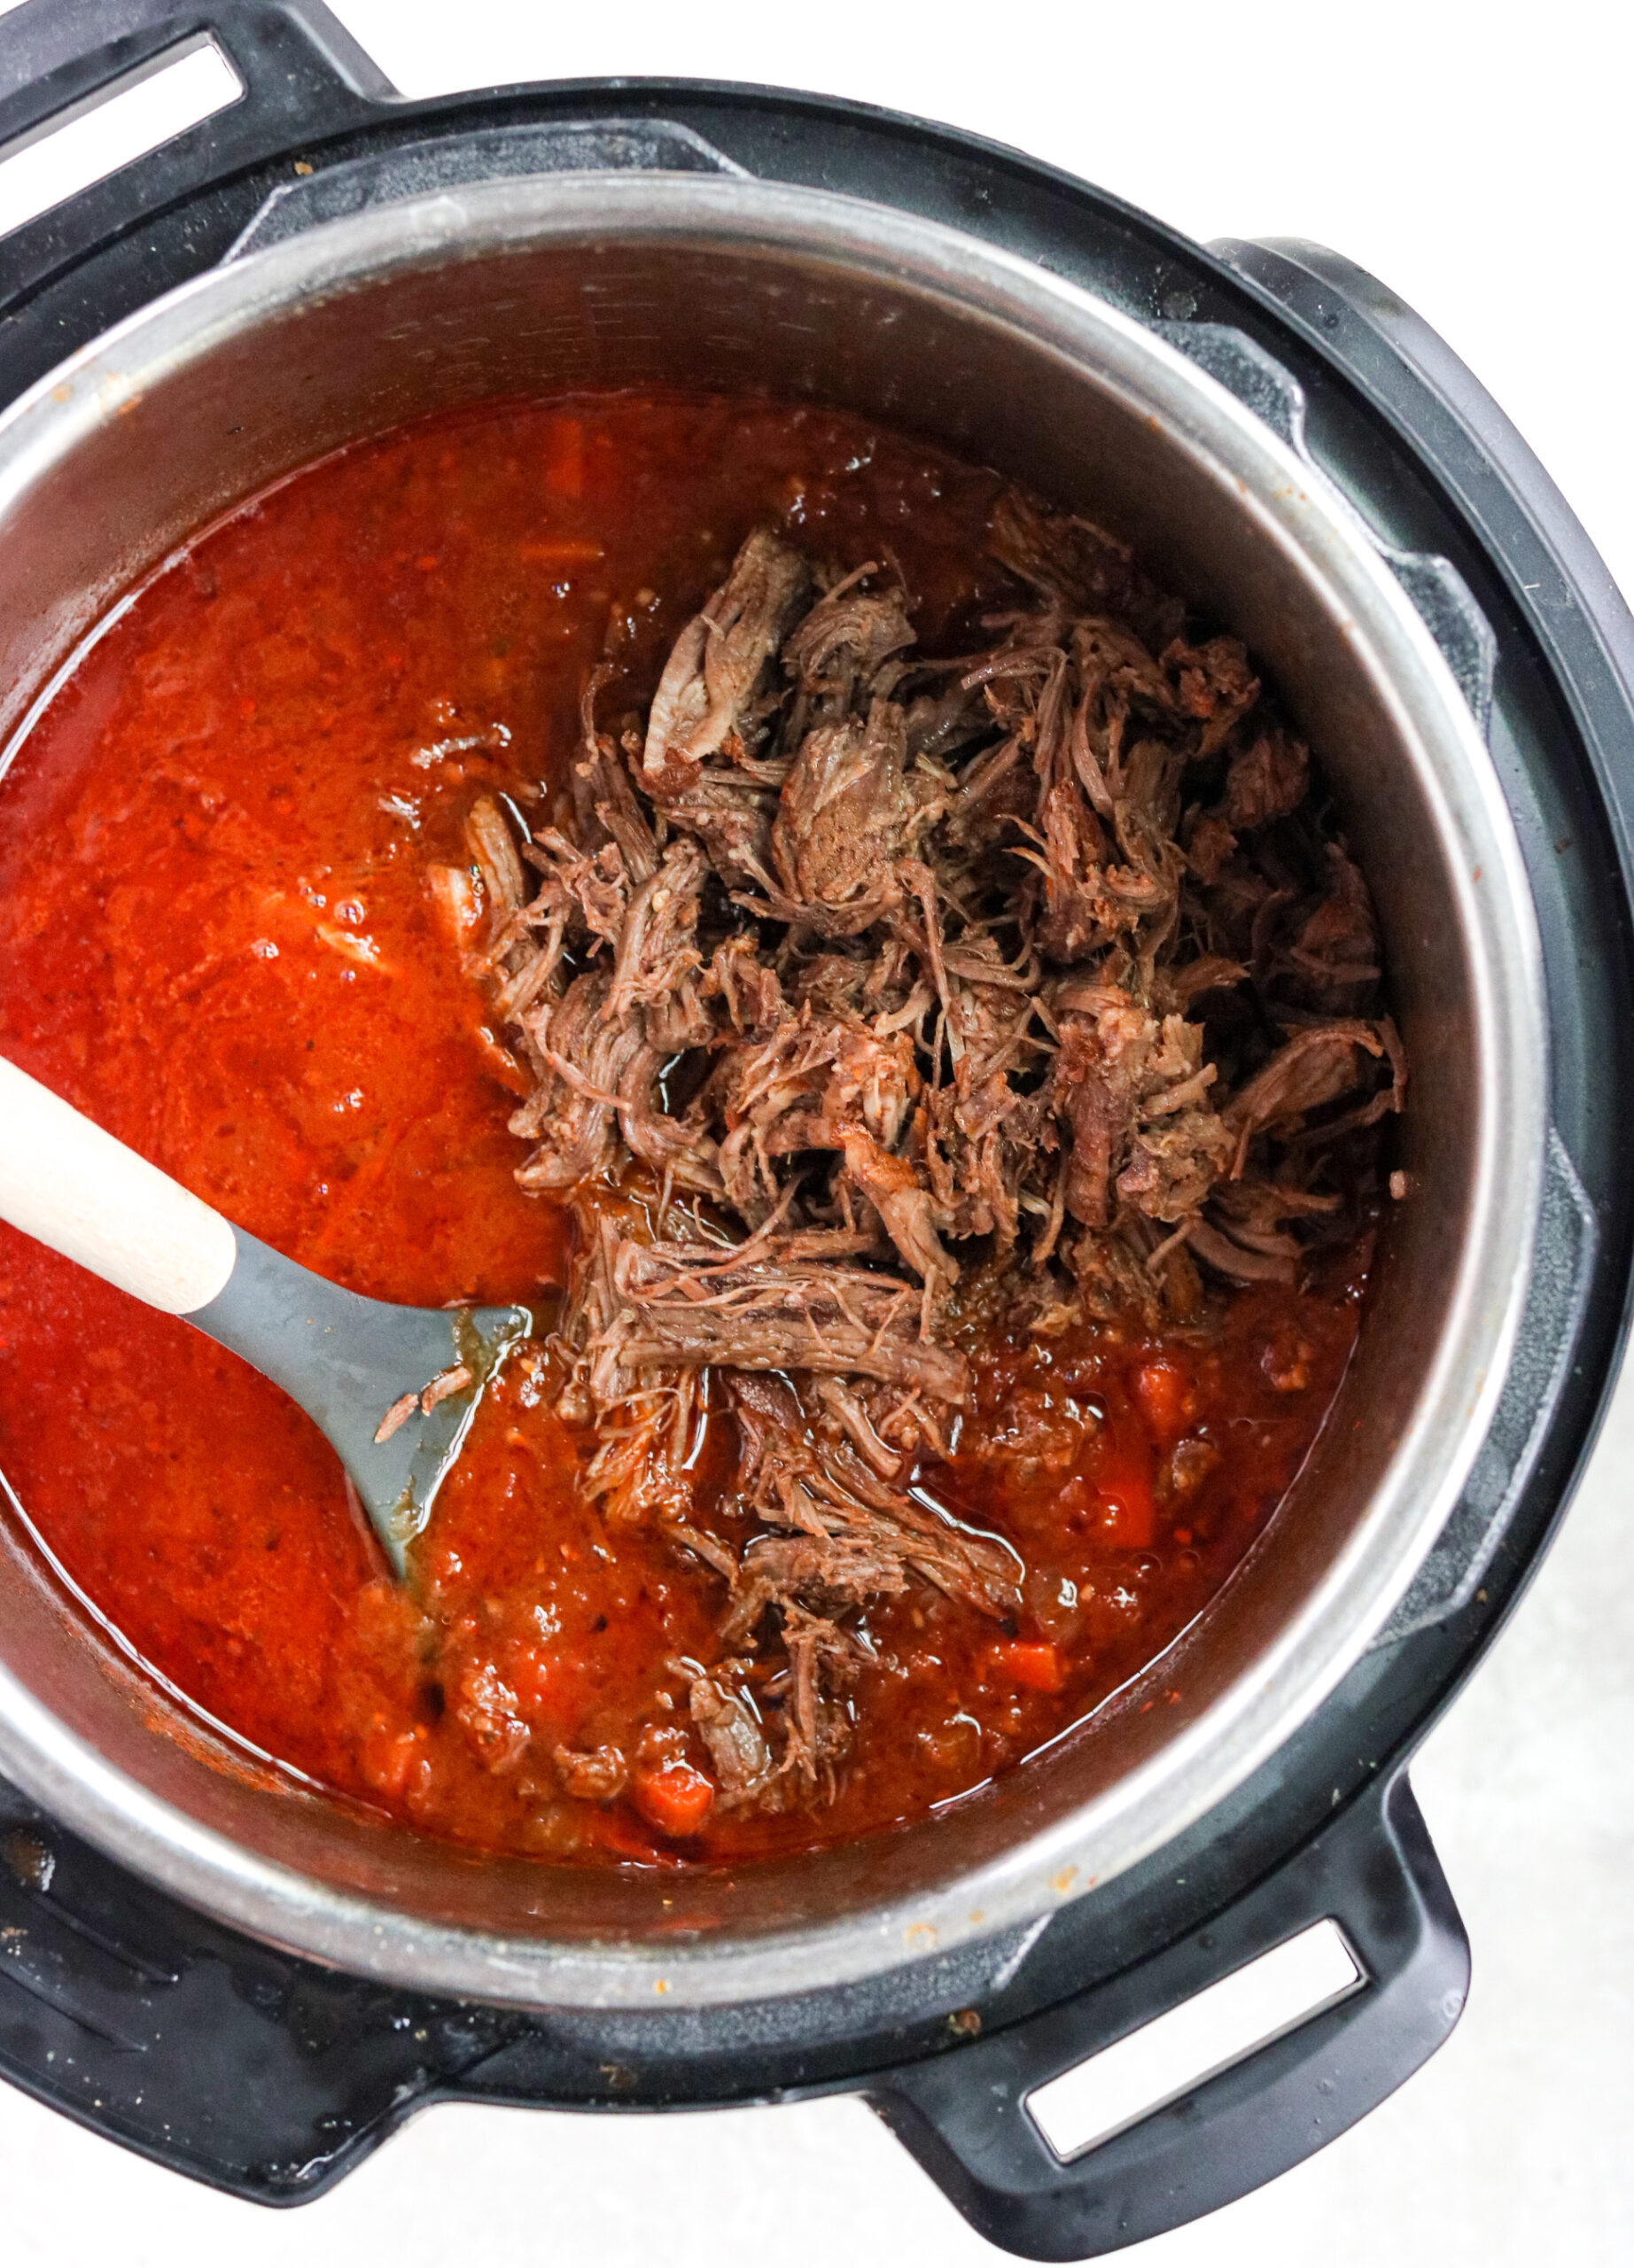 Sauce and shredded beef in the instant pot with a spoon